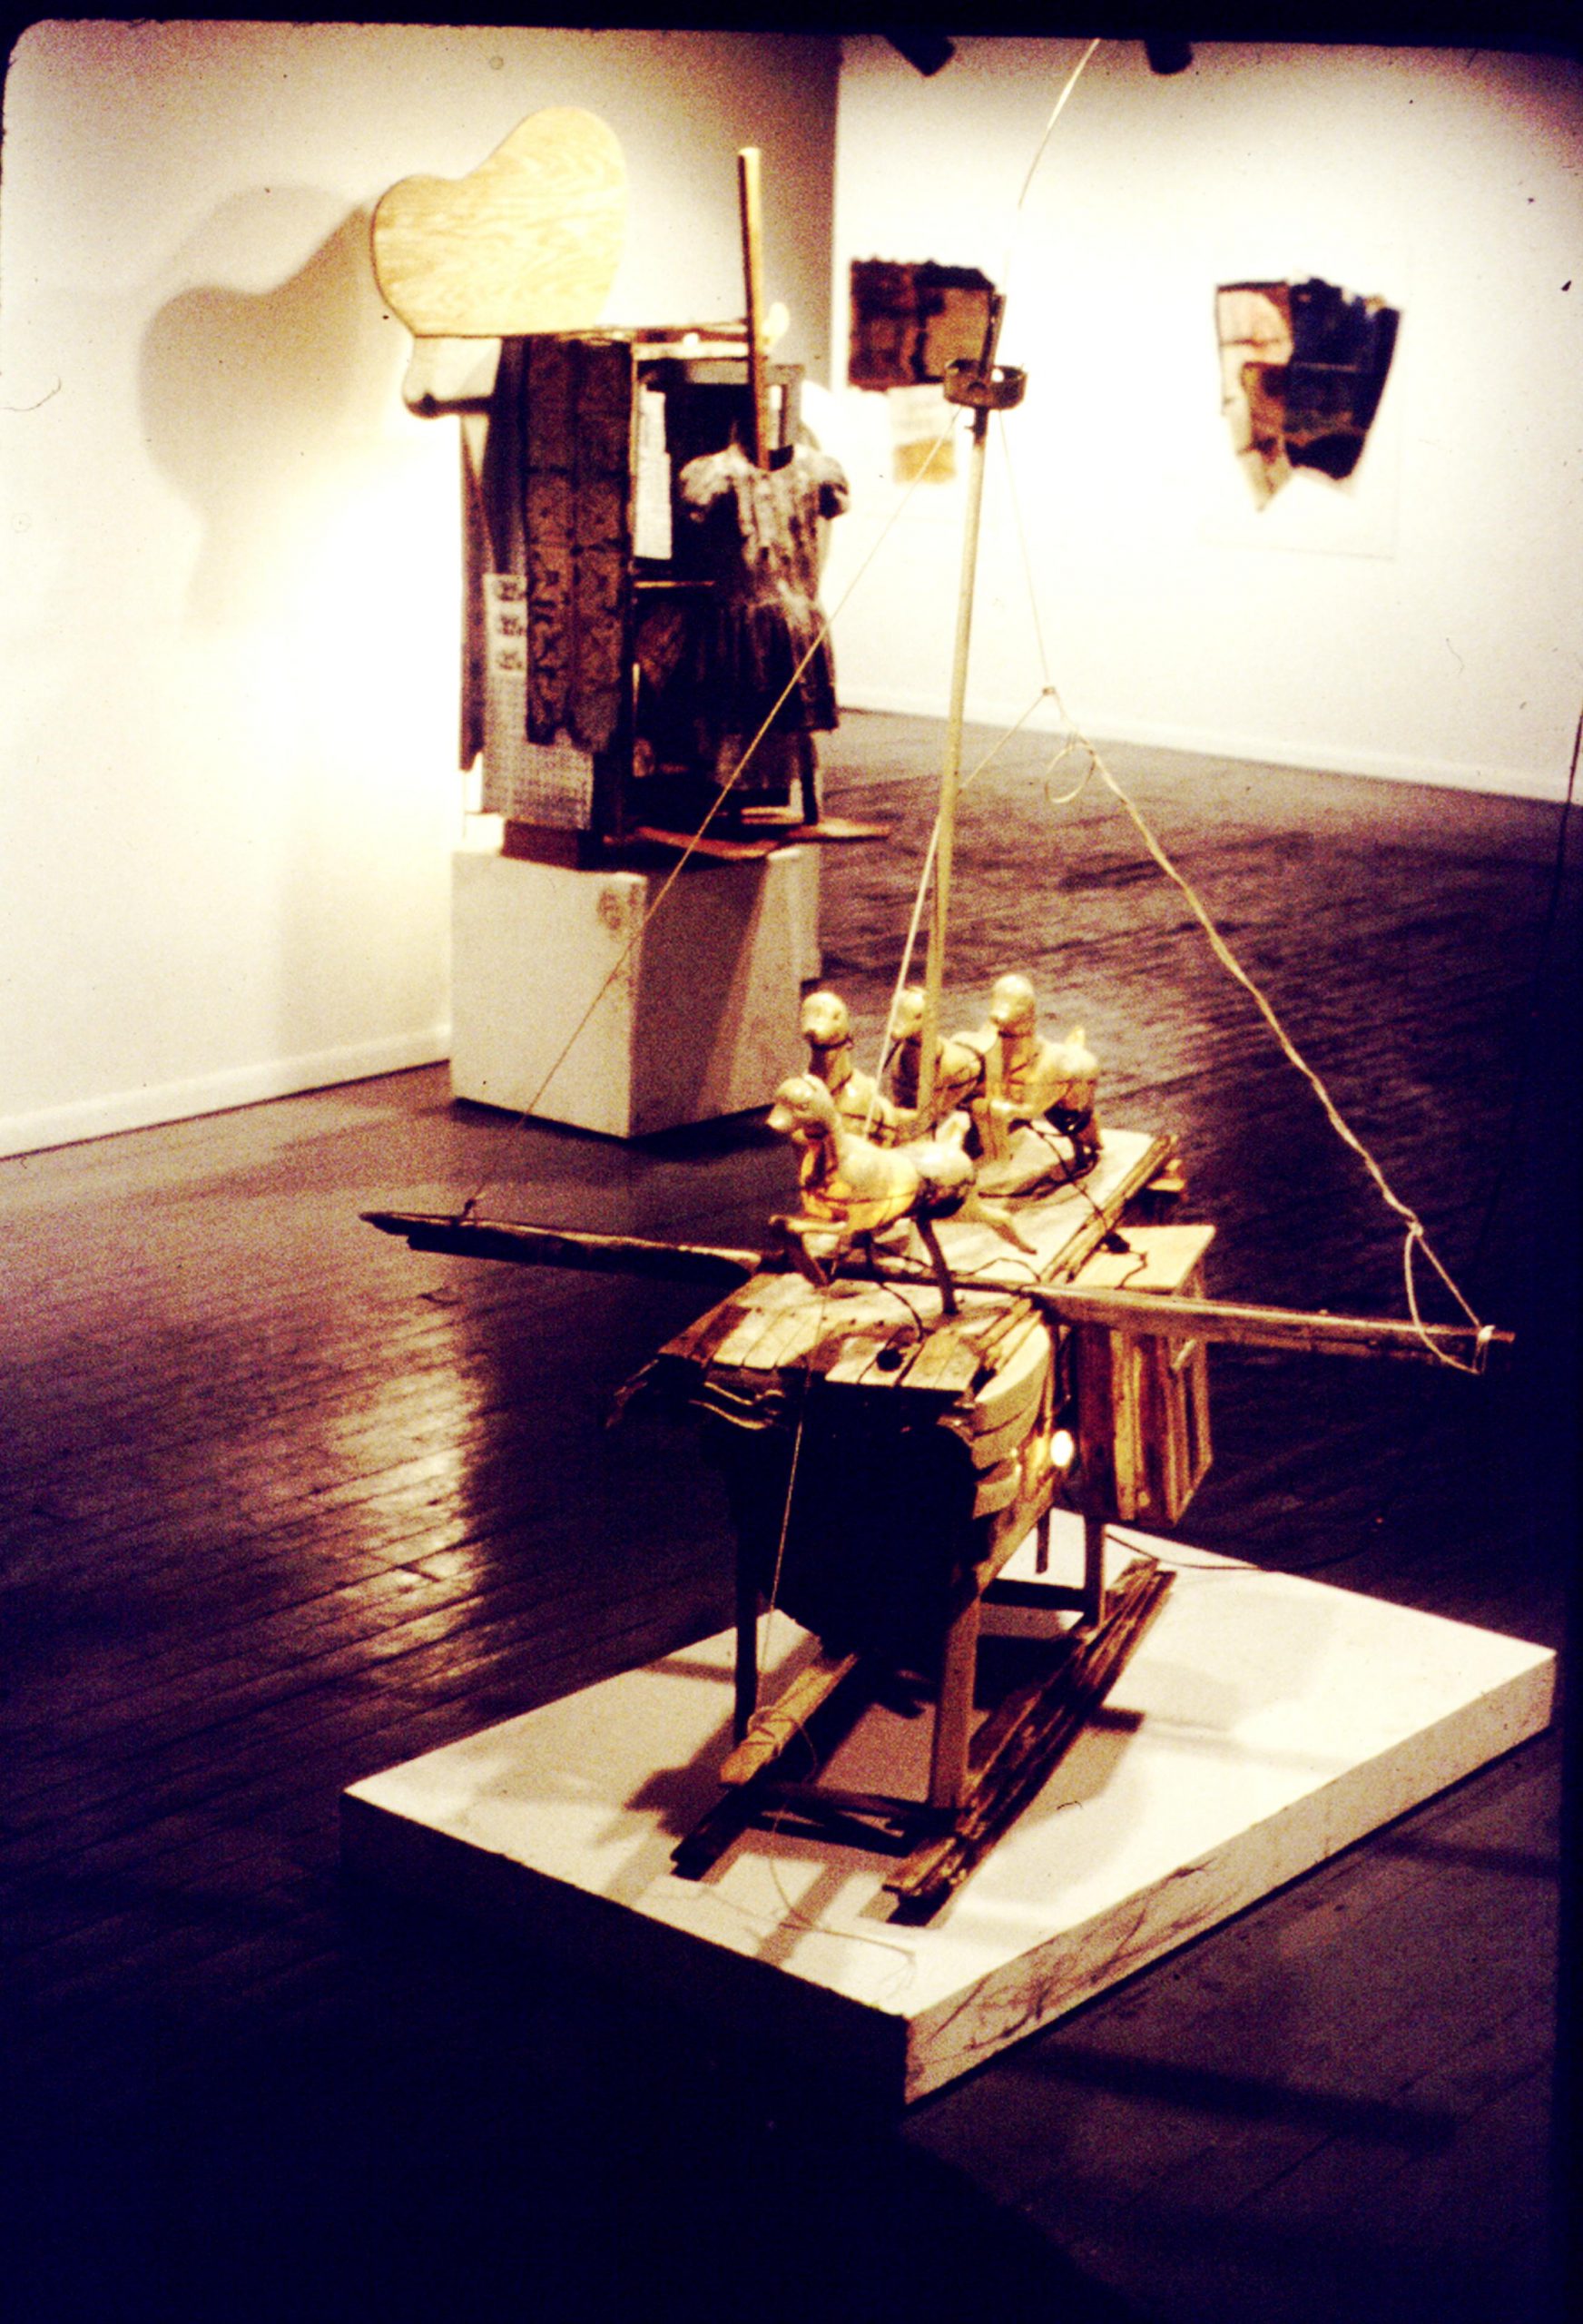 Reliquary & Mayflower, 1993 by Victor Sparrow.